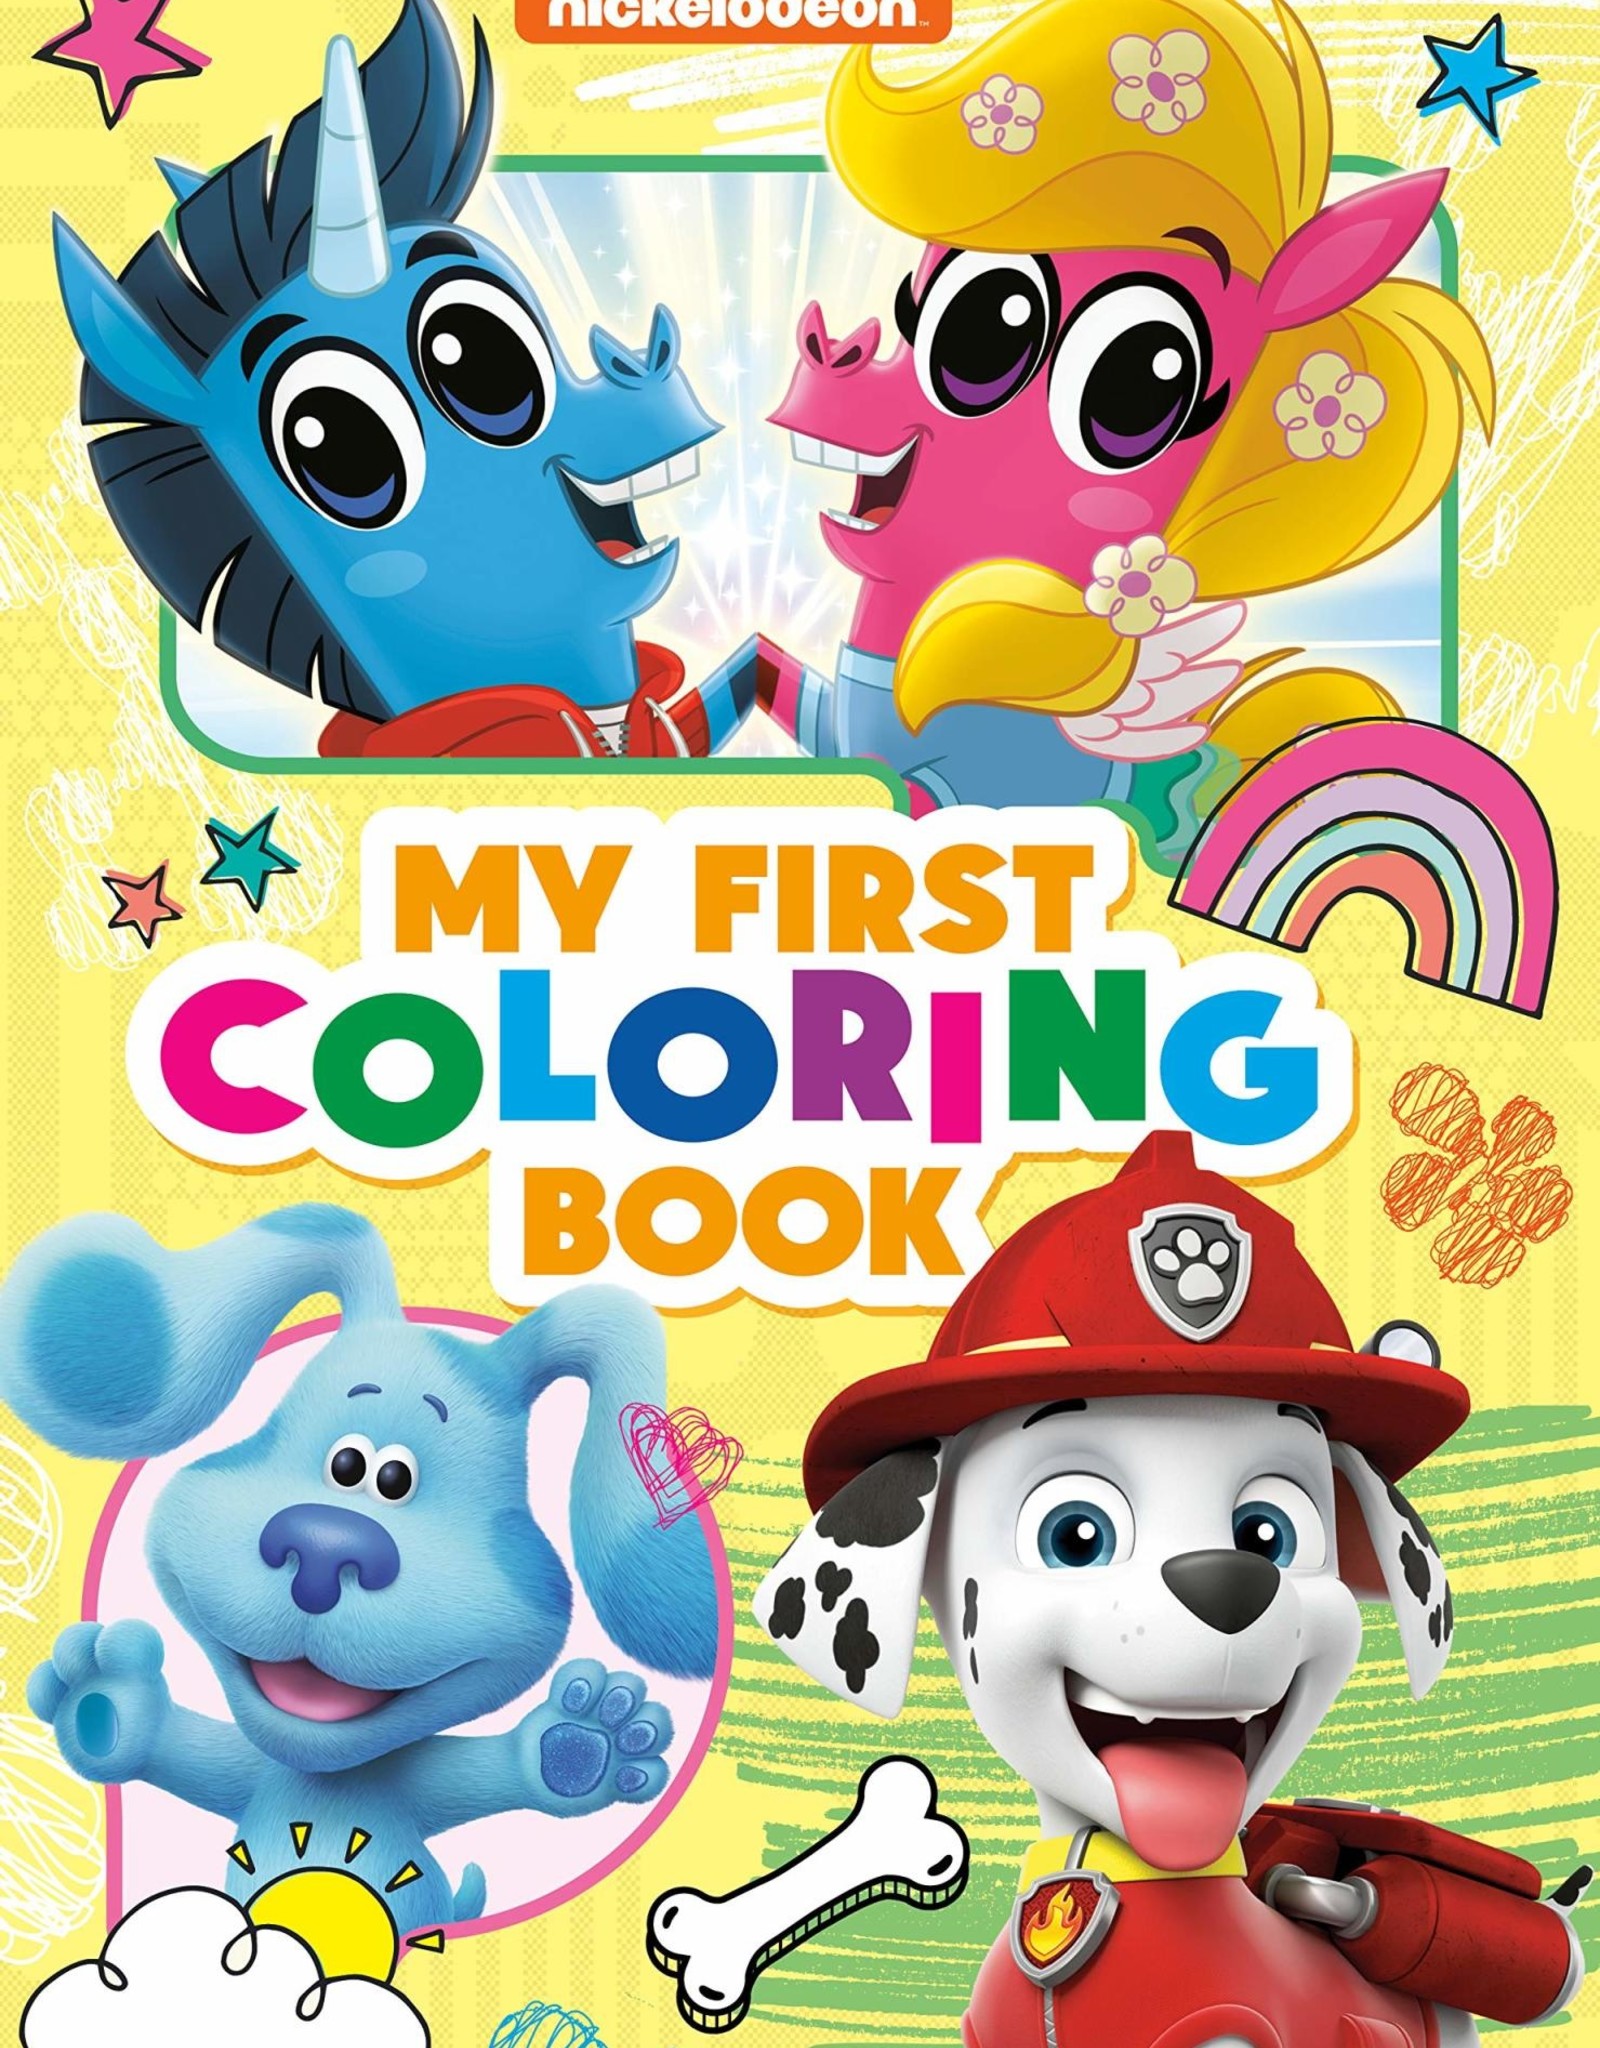 Nickelodeon Nickelodeon My First Coloring Book